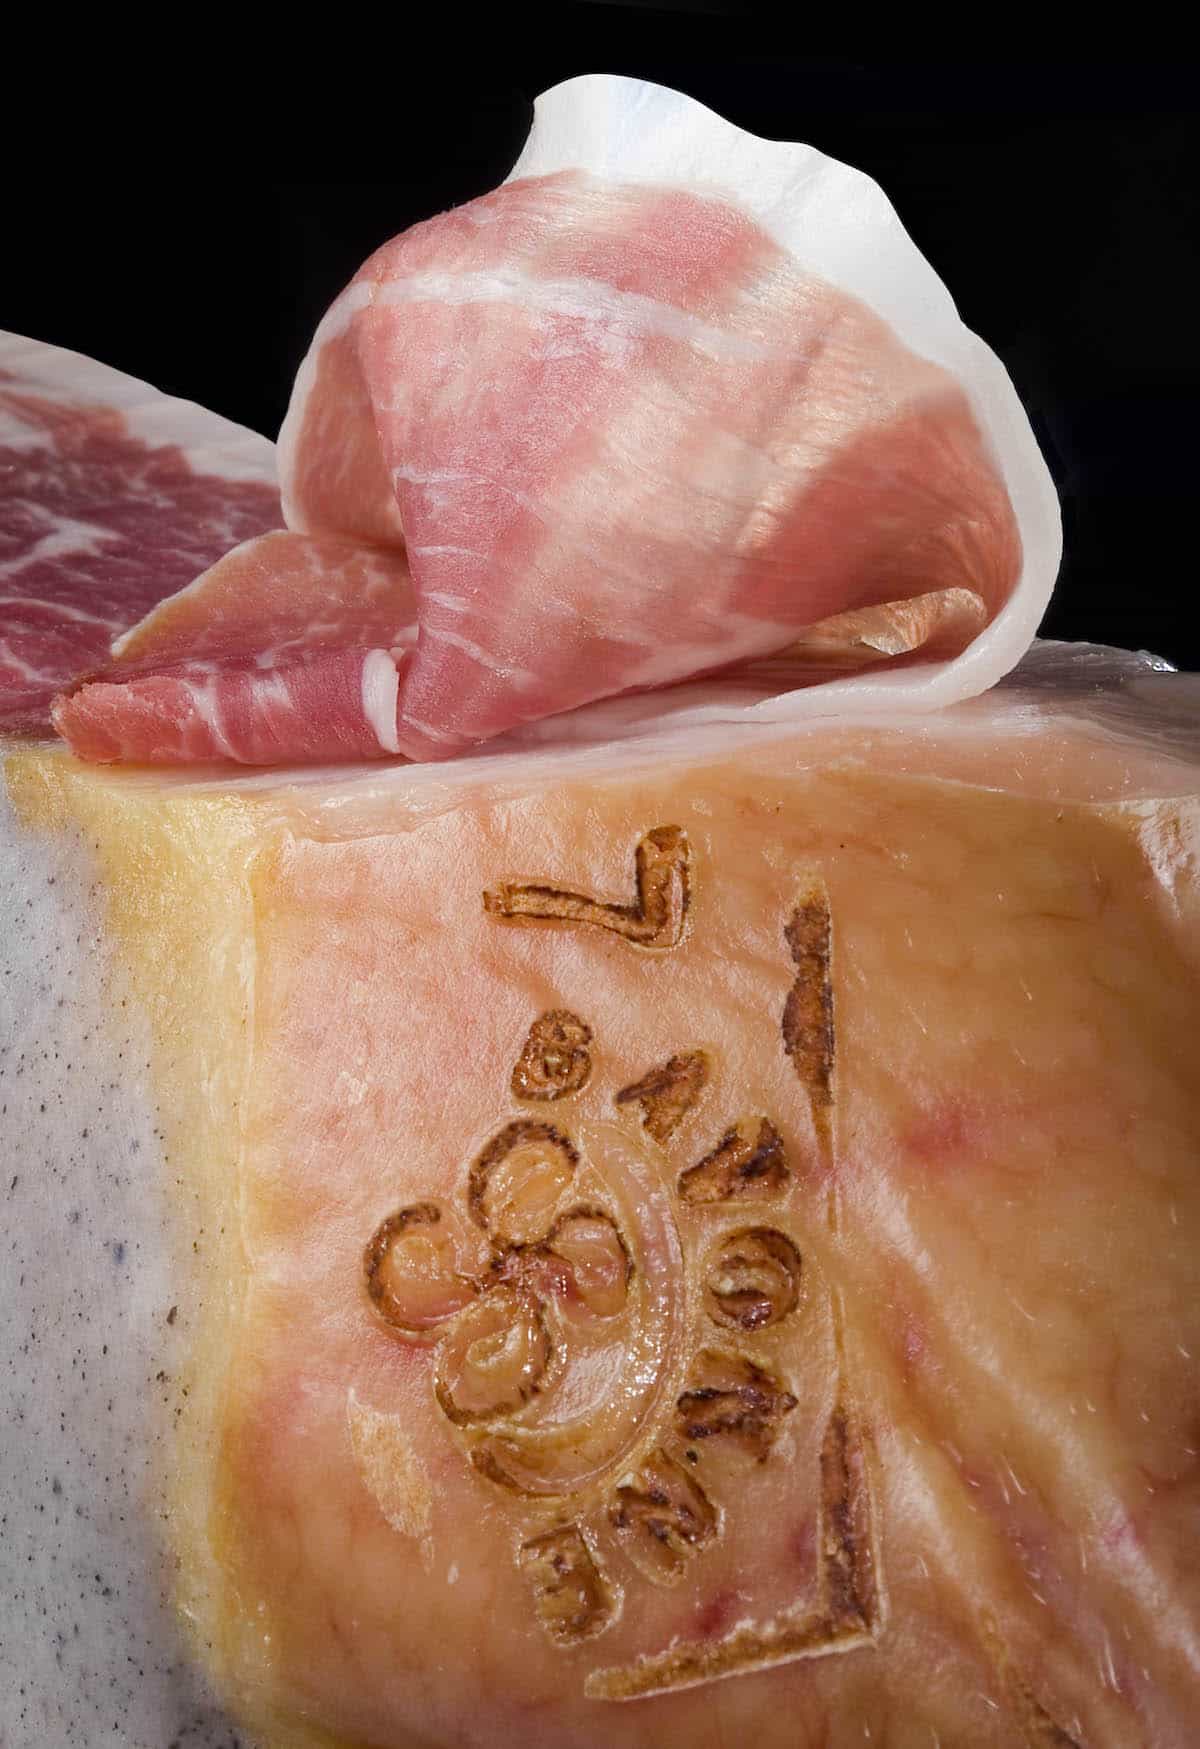 A slice of cured ham lying atop the leg it was carved from.